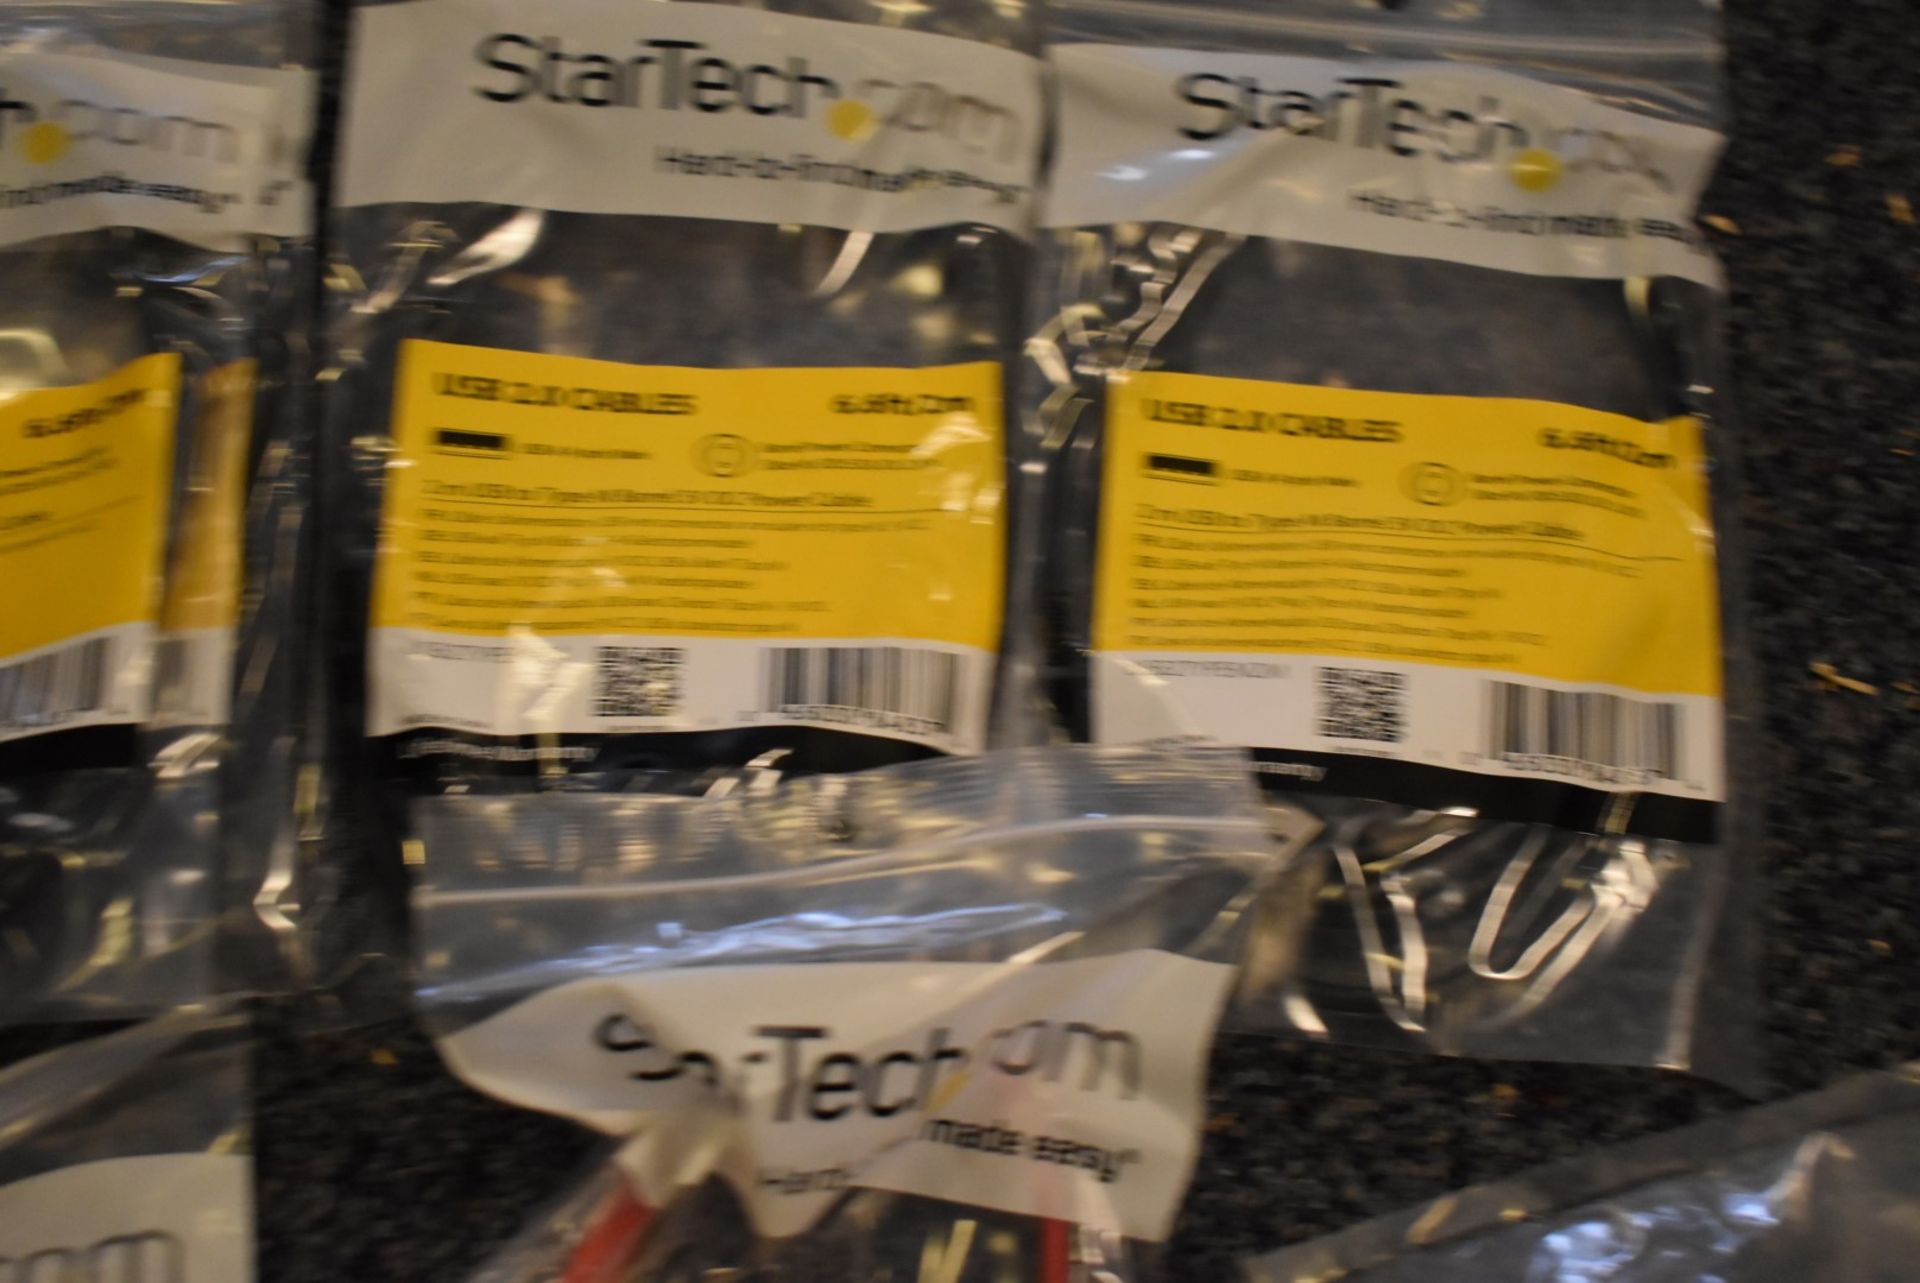 177 x Assorted StarTech Cables - Huge Lot in Original Packing - Various Cables Included - Image 40 of 50